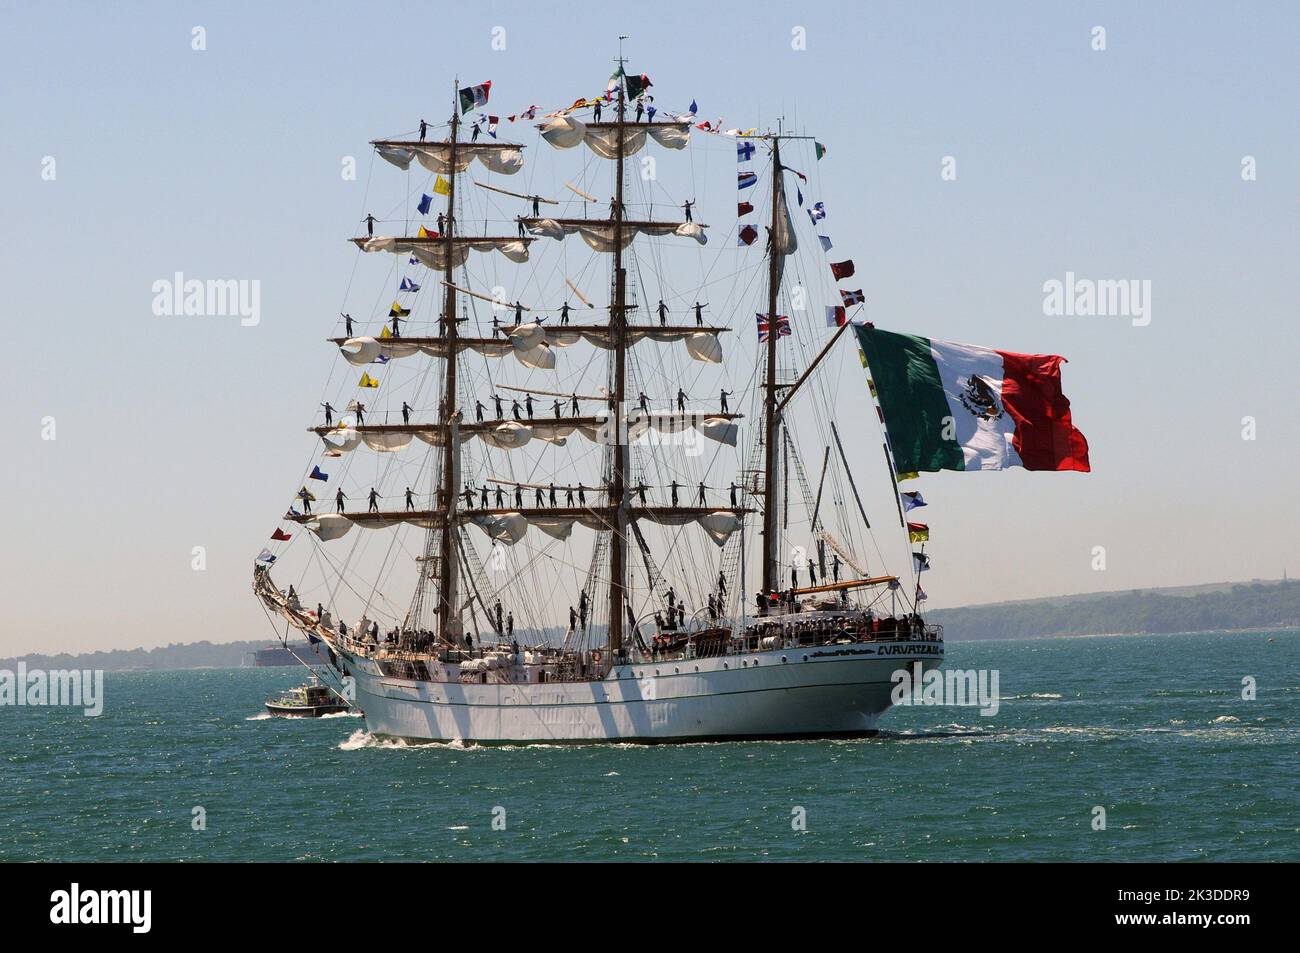 A magnificent surprise for sunbathers at Southsea as the Mexican Navy Sail Training ship, Cuauhtemoc leaves Portsmouth Harbour. Pic Mike Walker, Mike Walker Pictures,2015 Stock Photo